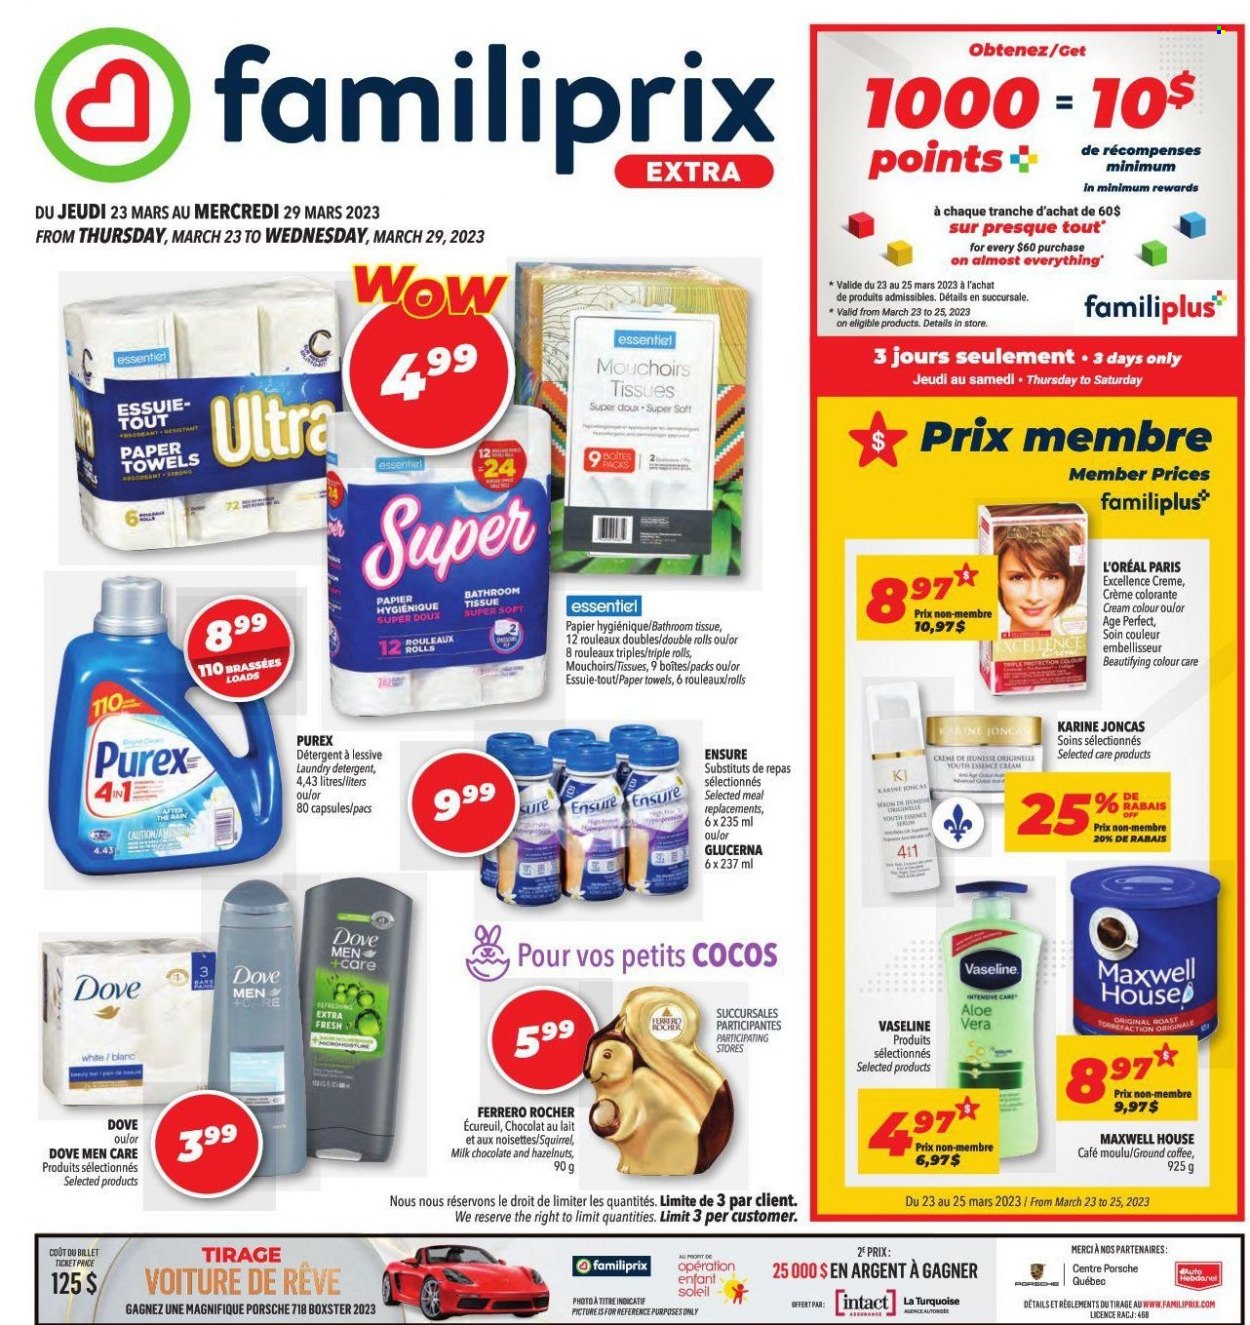 thumbnail - Familiprix Extra Flyer - March 23, 2023 - March 29, 2023 - Sales products - Dove, milk chocolate, Mars, Merci, Maxwell House, coffee, ground coffee, bath tissue, kitchen towels, paper towels, laundry detergent, Purex, Vaseline, L’Oréal, Sure, Glucerna, detergent, Ferrero Rocher. Page 1.